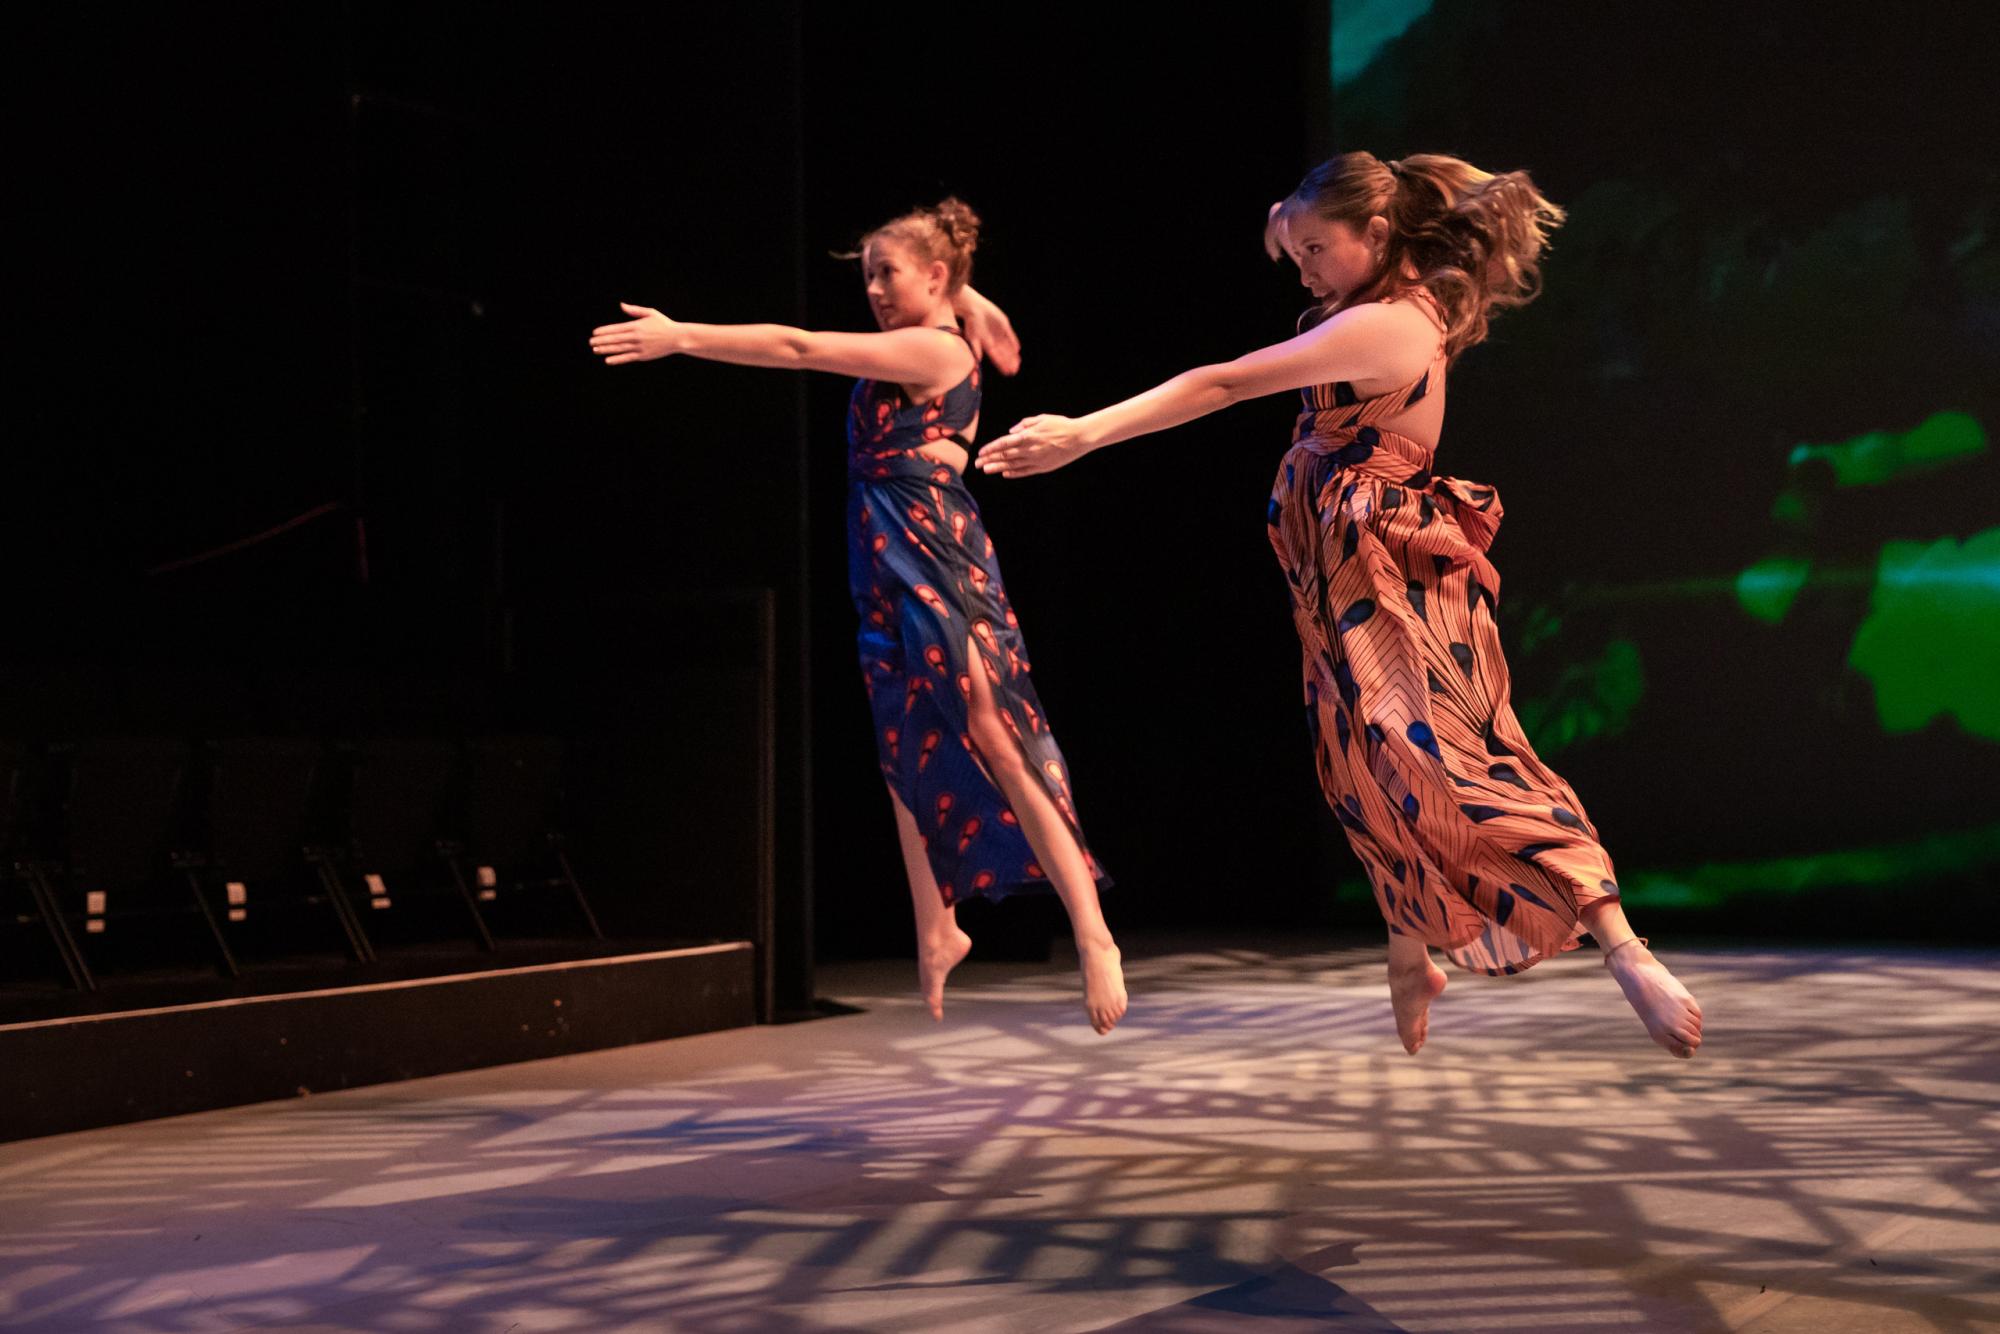 Two dancers dressed in animal print dresses jump in the air, with one arm outstretched 